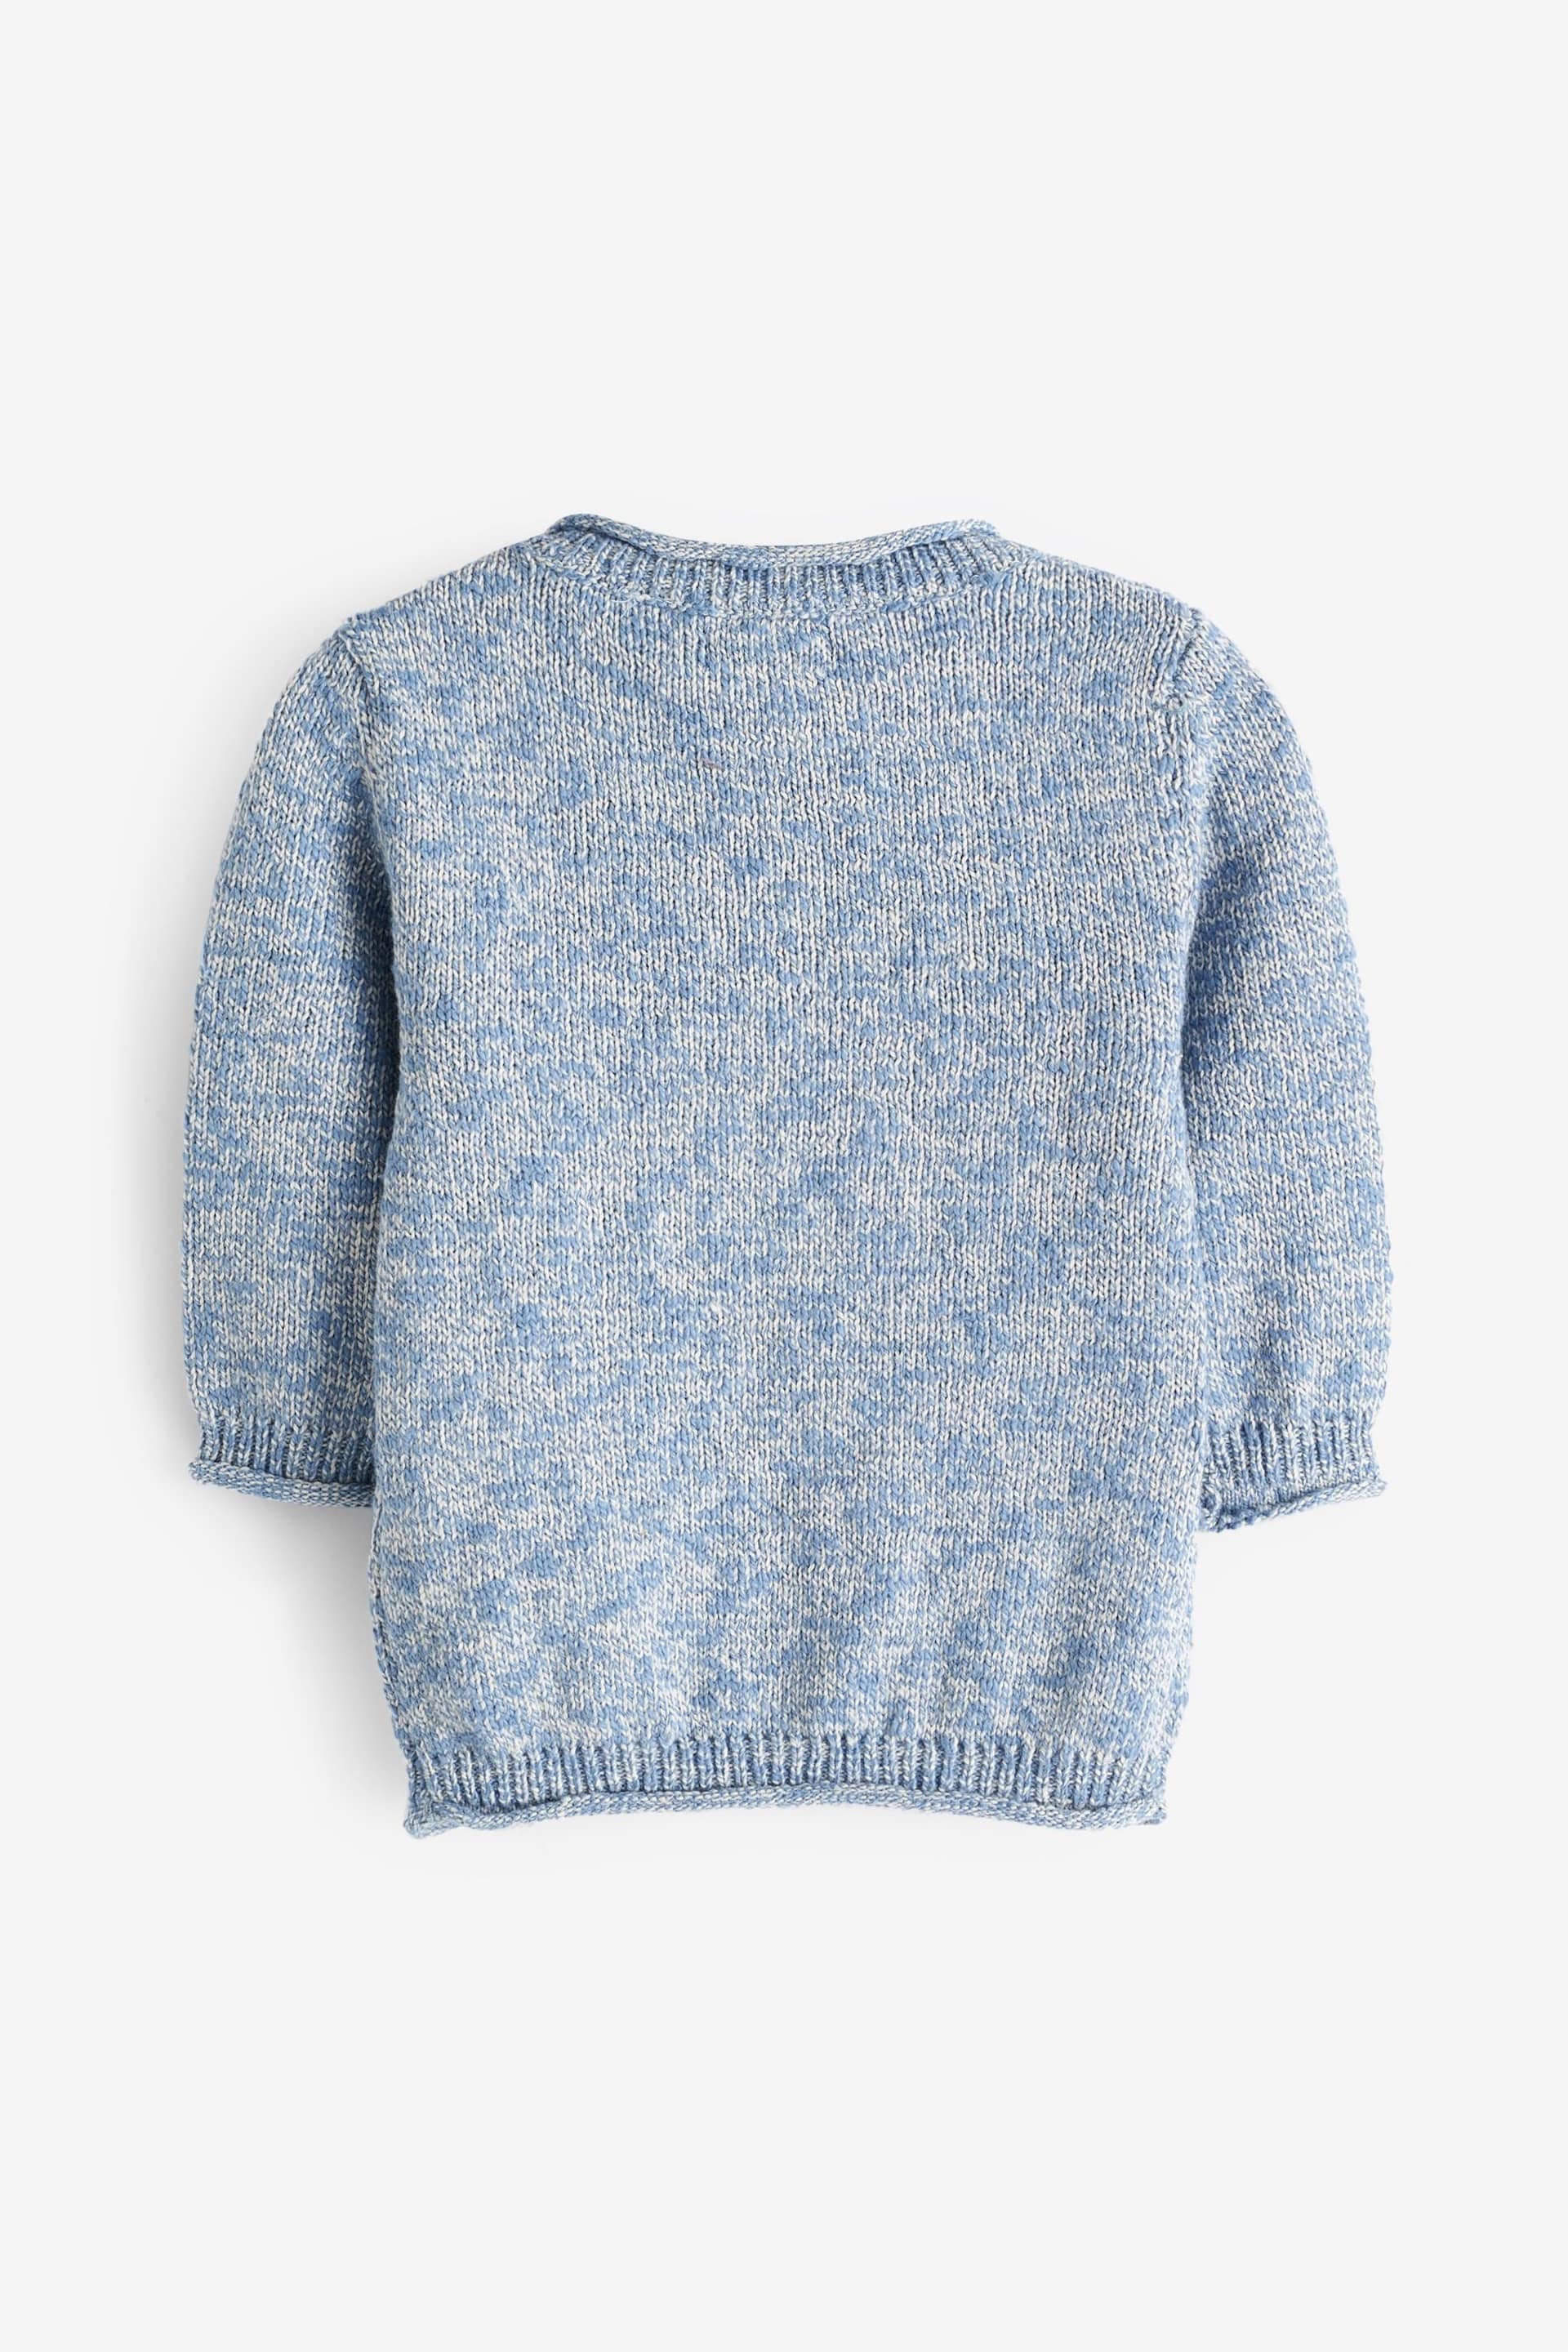 Blue Character Boat Knit Crew Jumper (3mths-7yrs) - Image 5 of 6